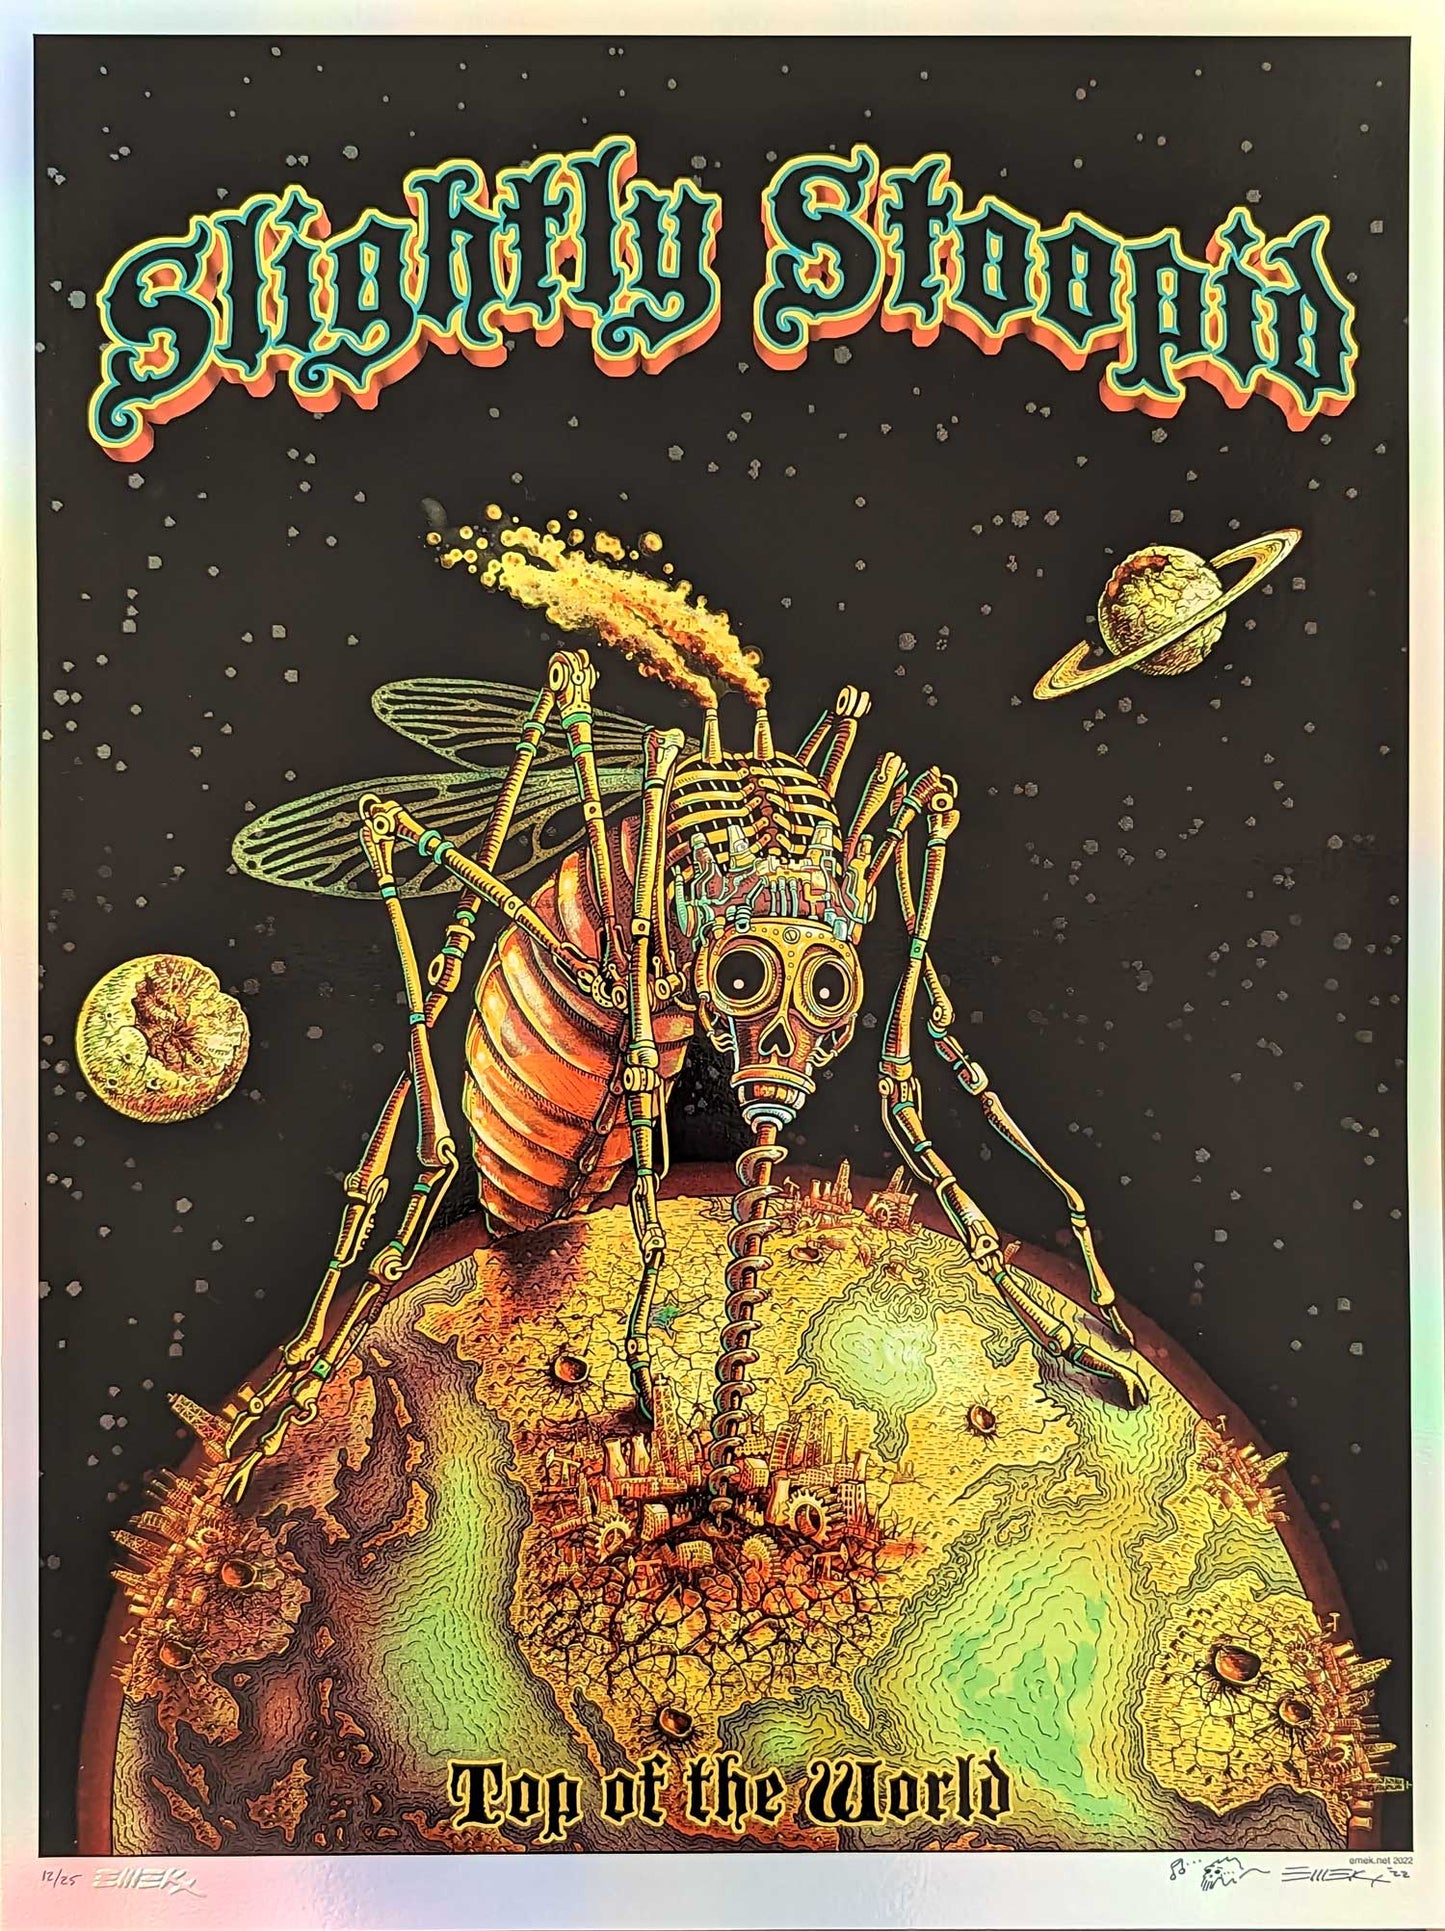 Slightly Stoopid Mosquito Foil Poster by Emek